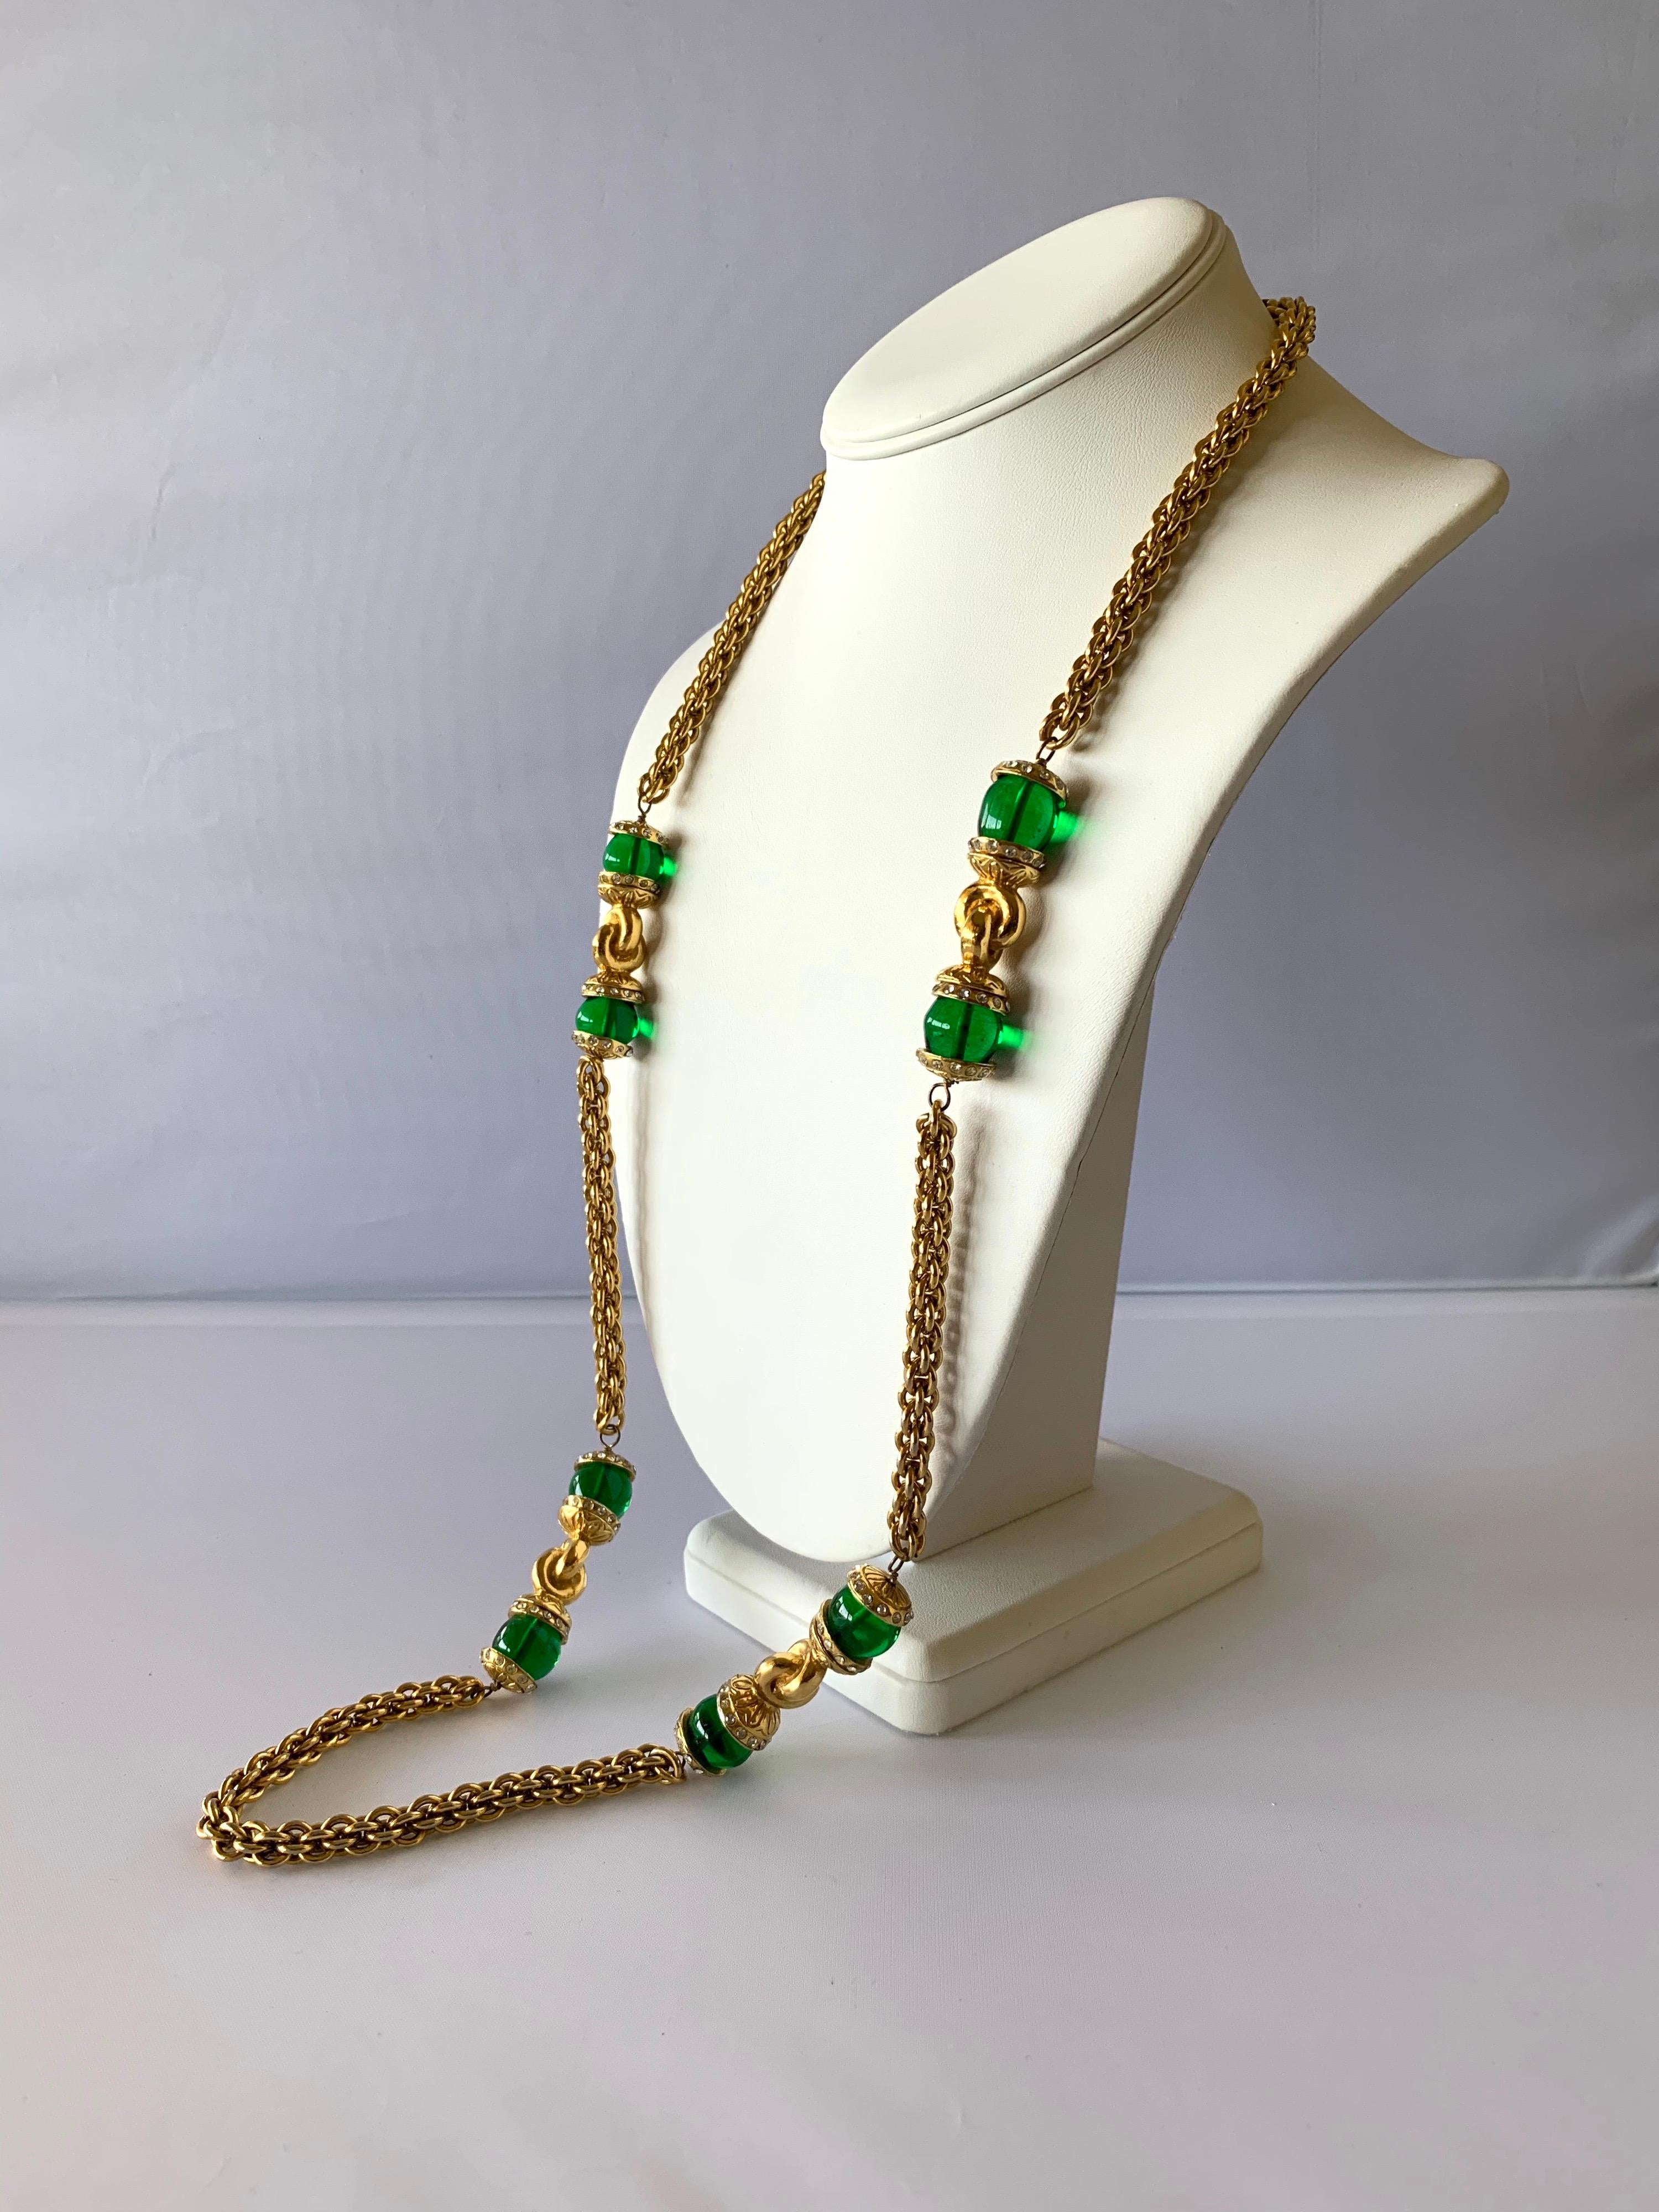 Exceptional vintage Coco Chanel Baroque style statement necklace, comprised out of heavy and ornate articulated gilt metal chain 